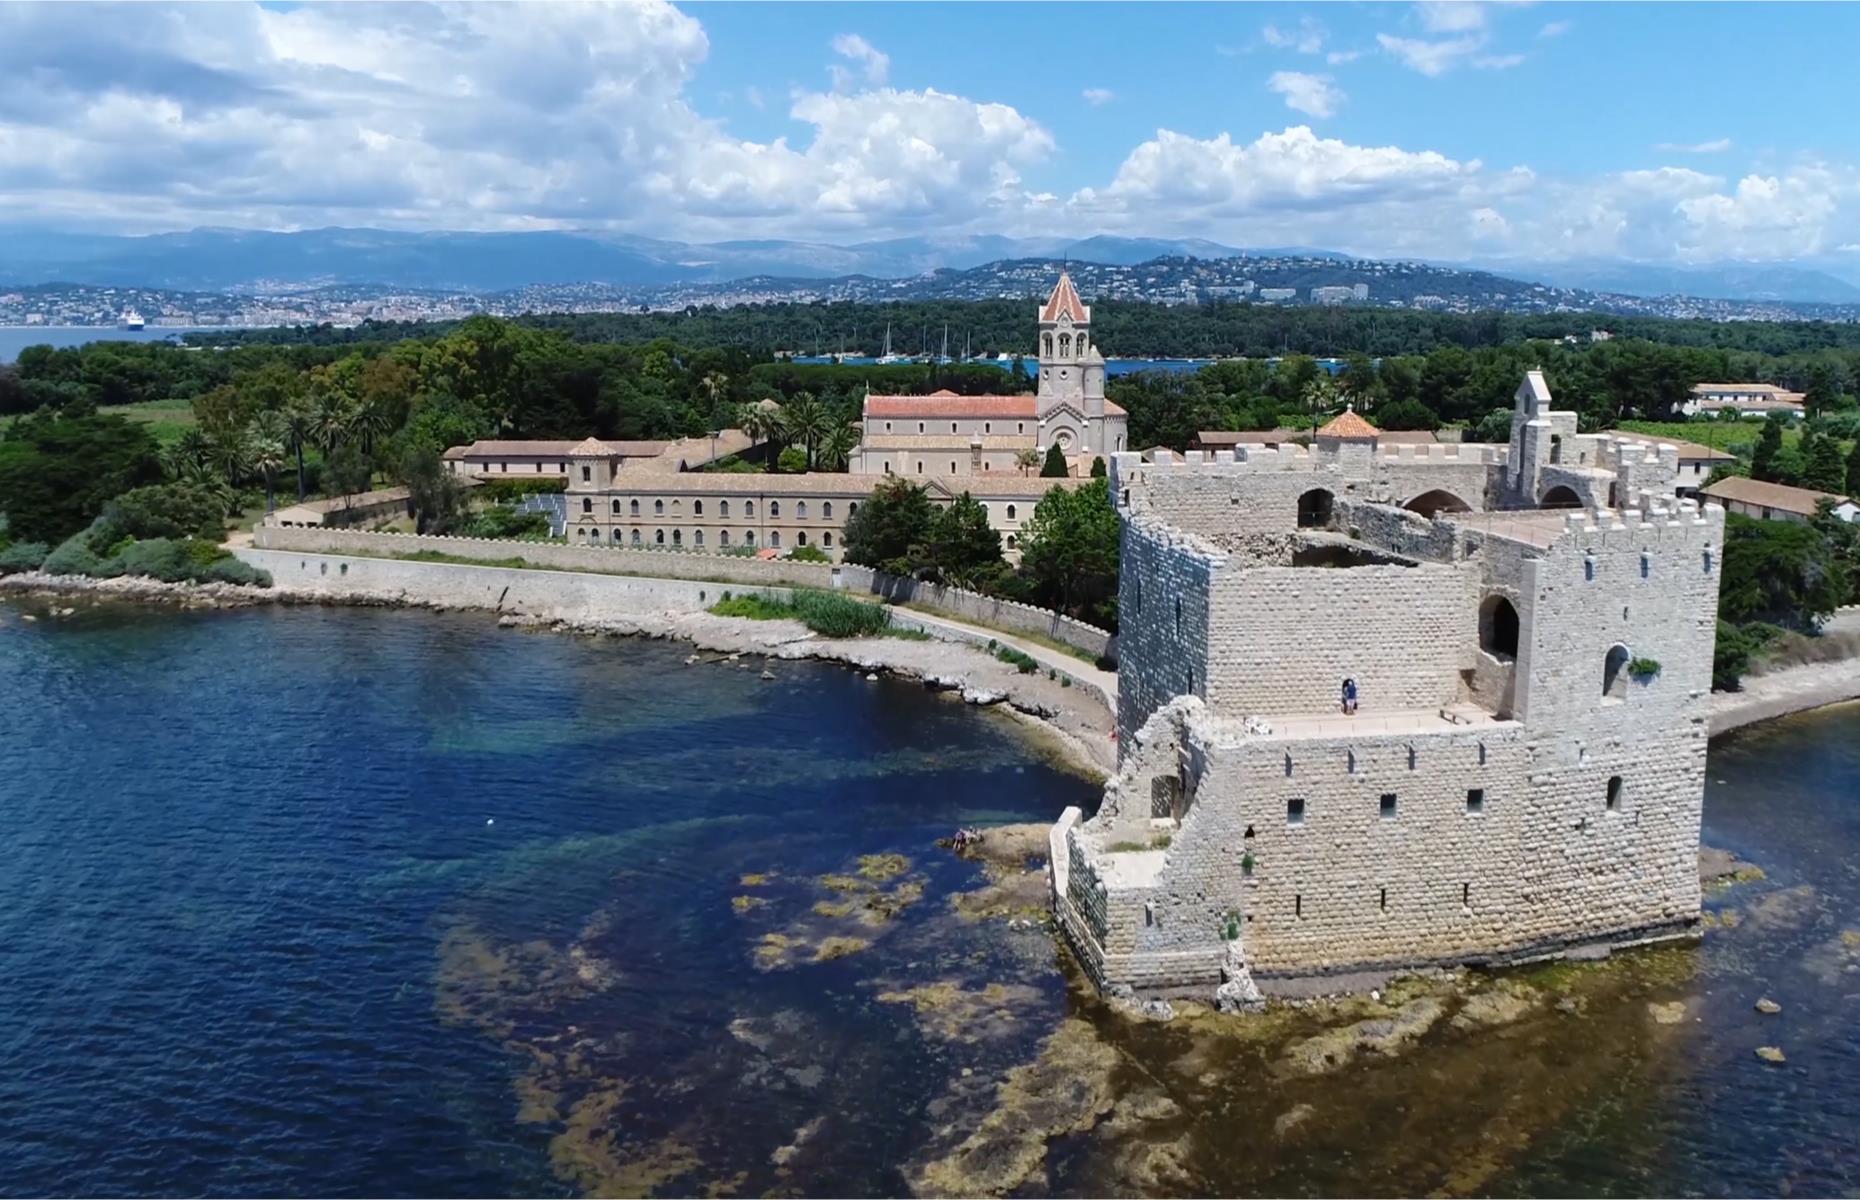 <p>It’s possible to visit the monastic island of Île Saint-Honorat by ferry from Cannes too to walk around its monuments, including the fortified medieval monastery at the tip of the island, and shady trails through forests of Aleppo and umbrella pines and past verdant vineyards. Six different grape varieties are cultivated by the Cistercian monks of Lérins Abbey and seven different types of wine produced, using ancient methods of viticulture. Try some at <a href="http://www.cannes-ilesdelerins.com/en/restaurant-la-tonnelle/">La Tonnelle</a>, the isle’s only restaurant which opens for lunch and serves the abbey’s wines and liqueurs.</p>